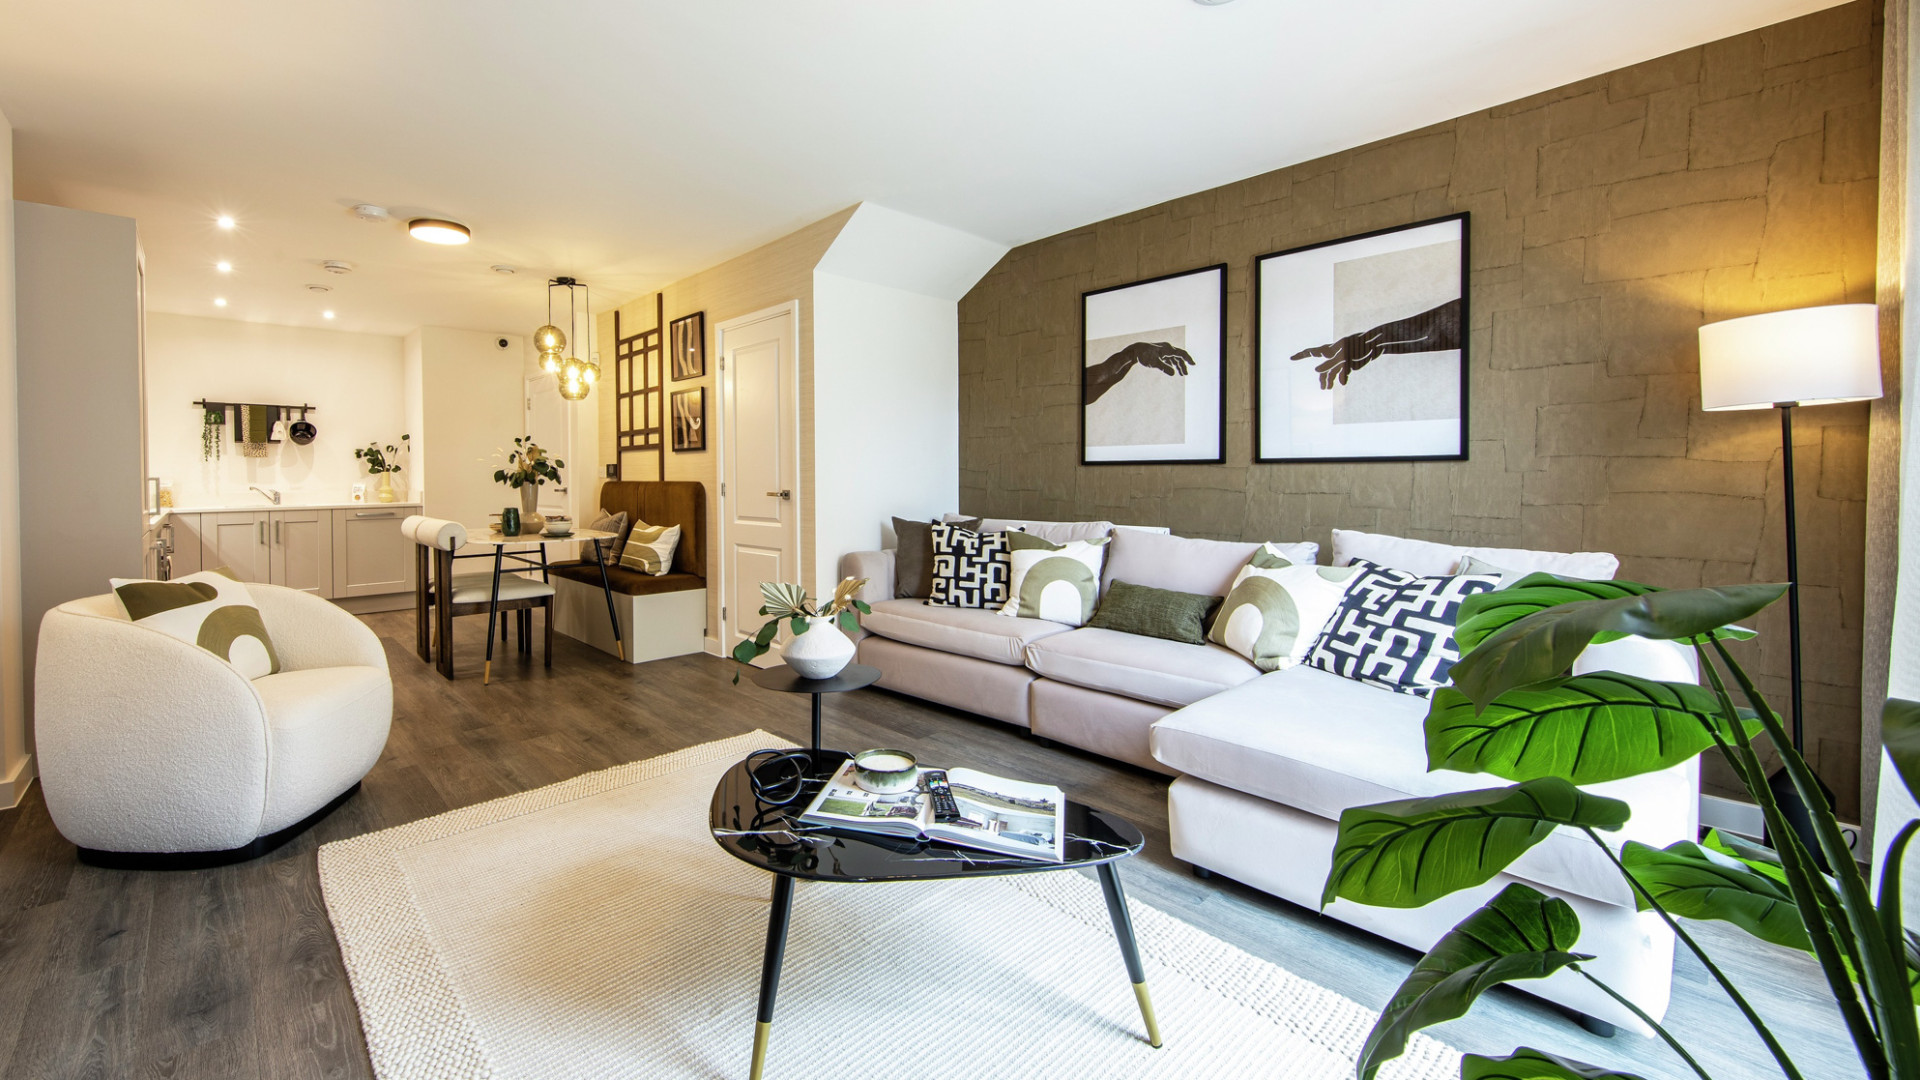 New Homes in Brentwood, Essex | Fairview New Homes